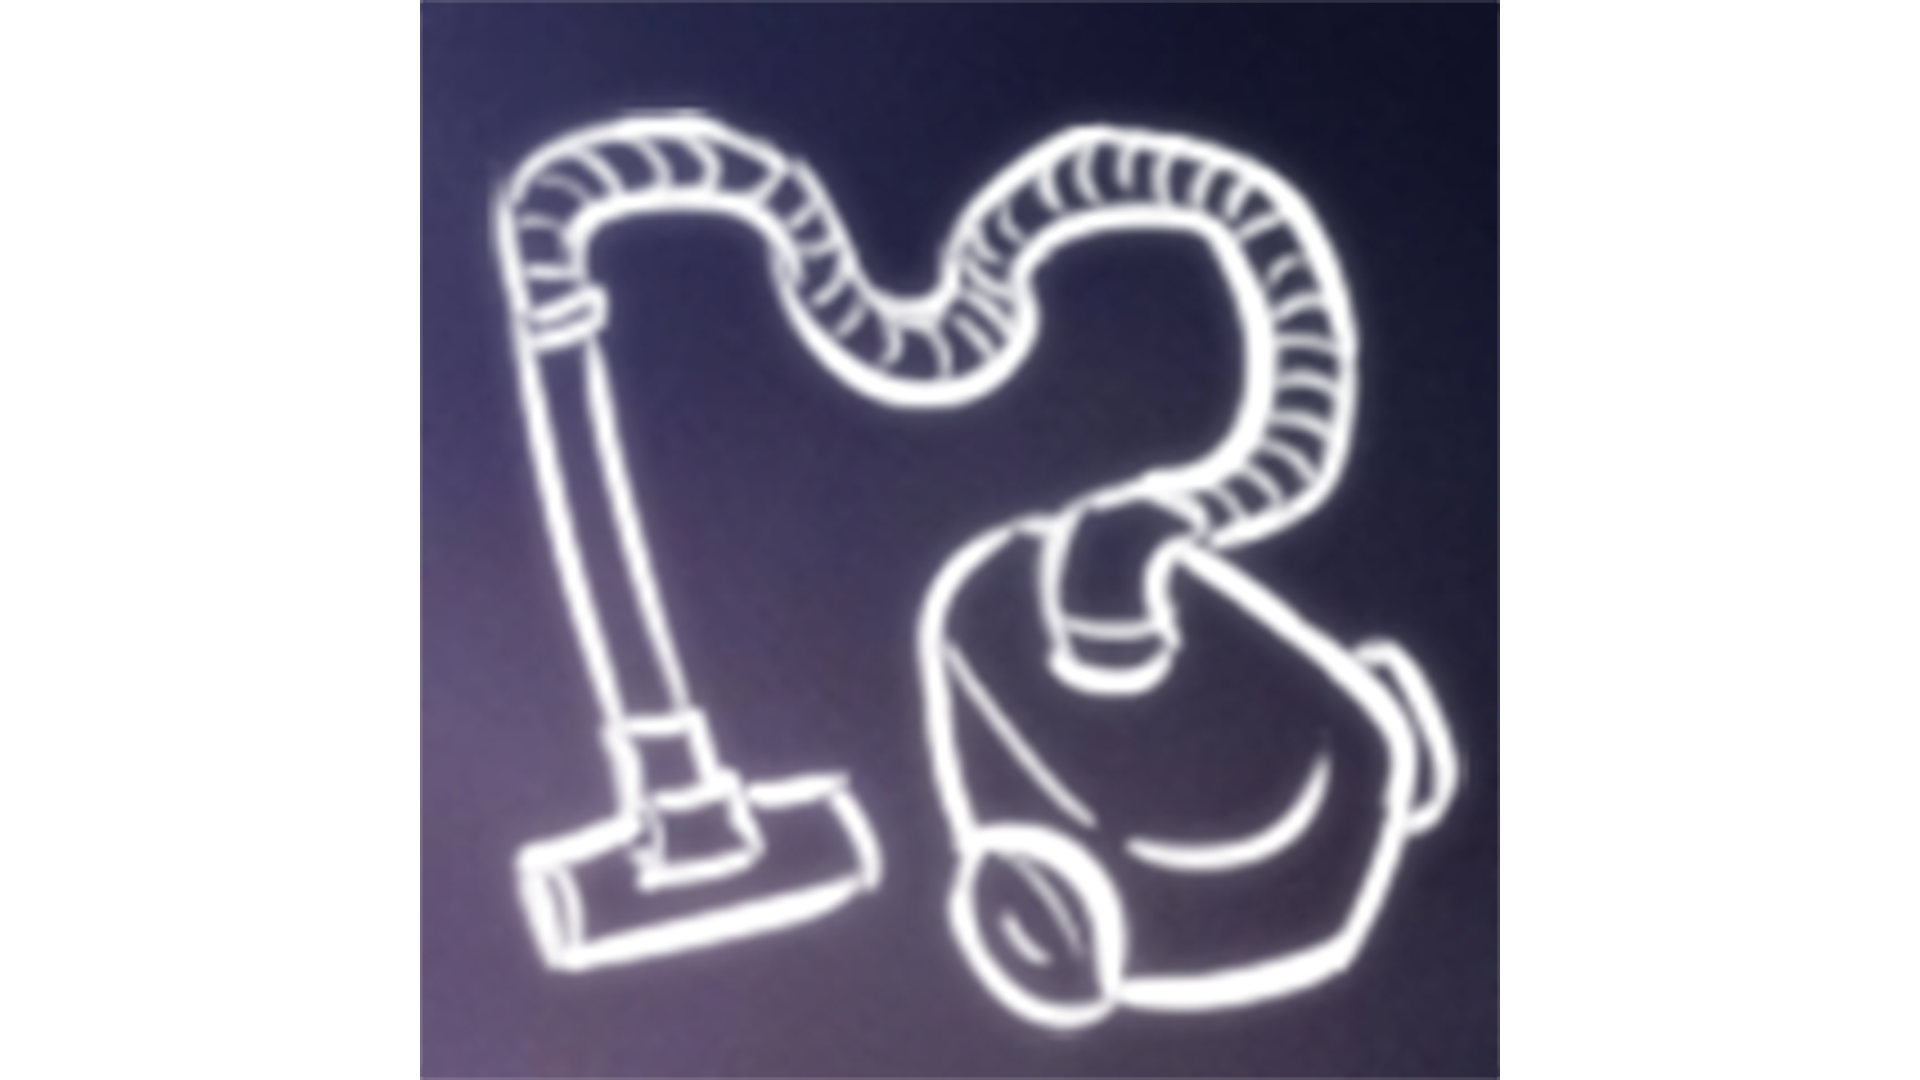 Icon for Clean carpet